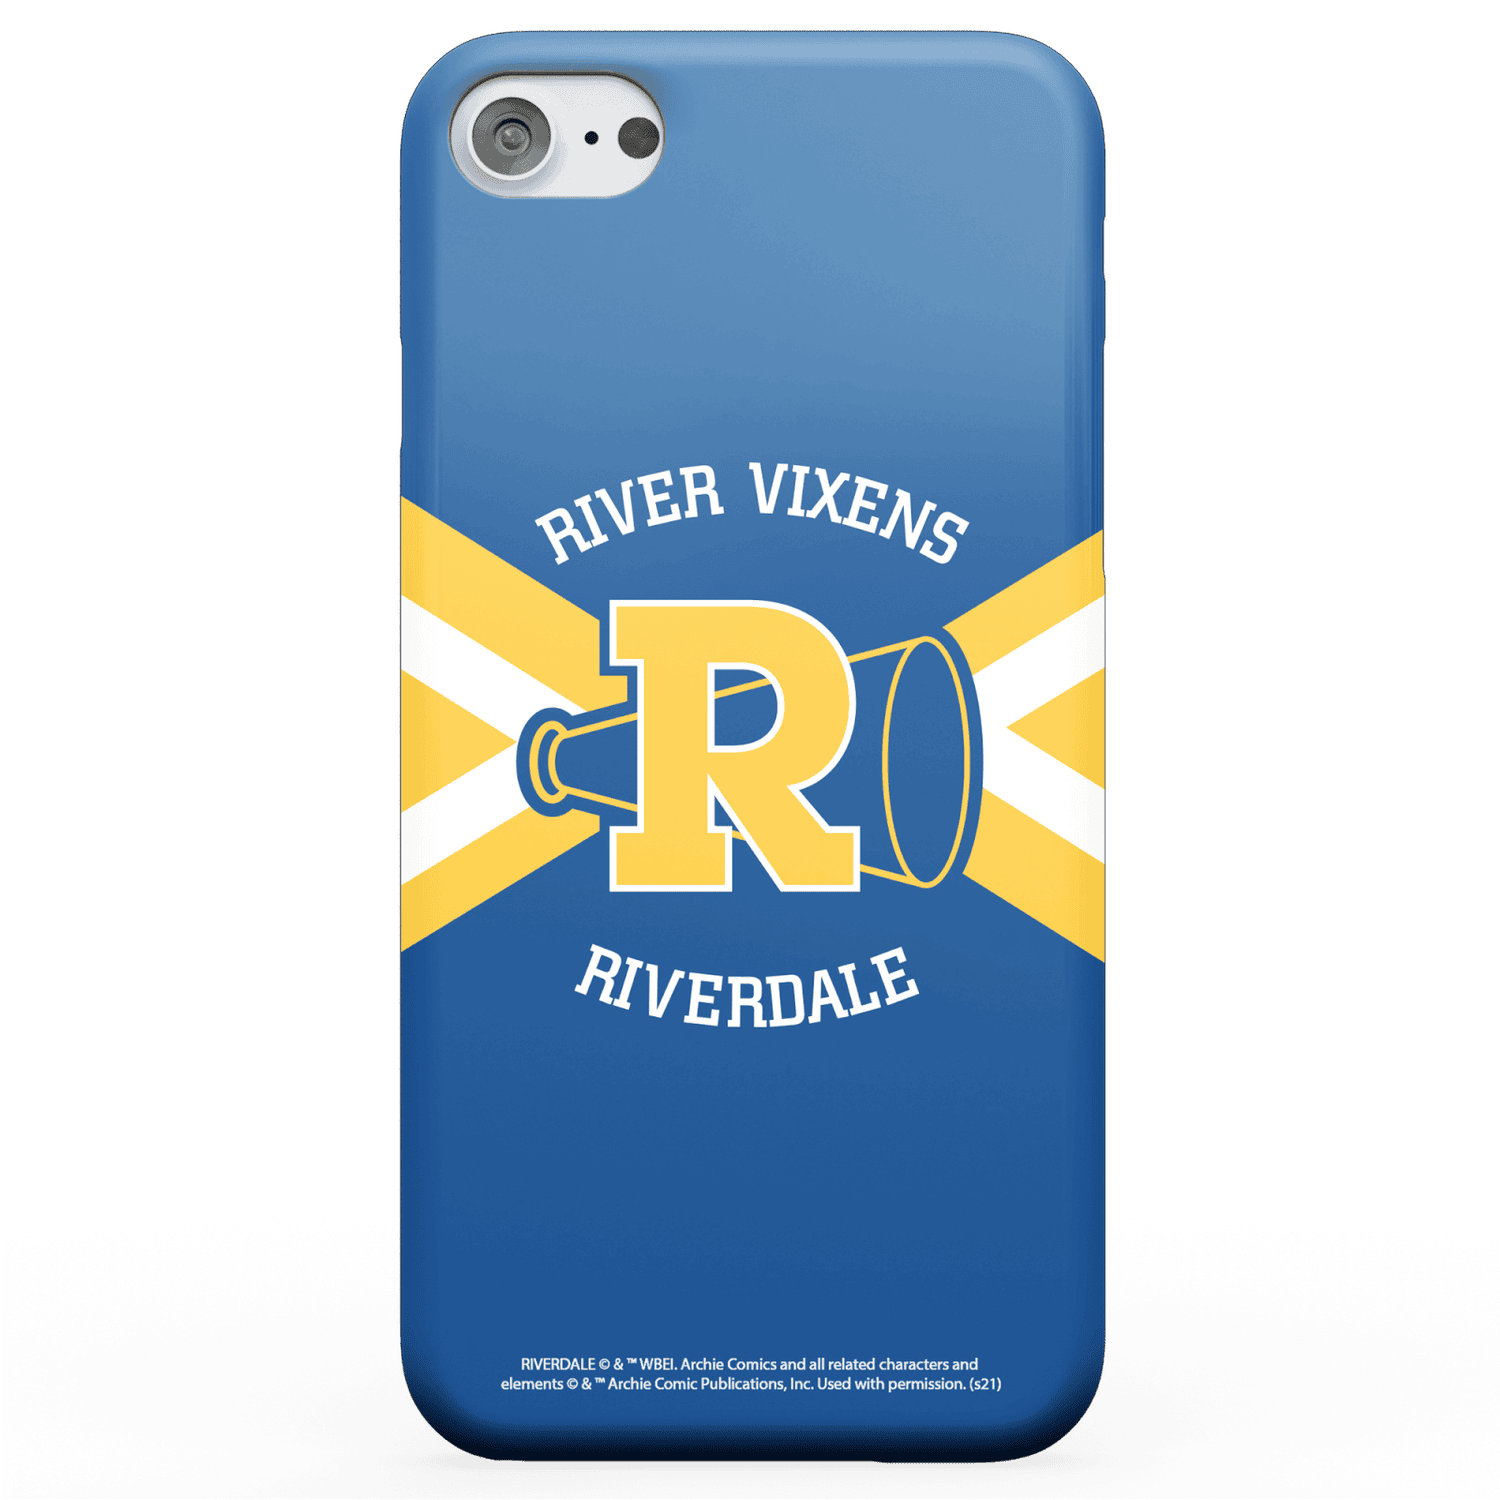 Riverdale River Vixens Phonecase for iPhone and Android - Samsung S10E - Snap case - mat